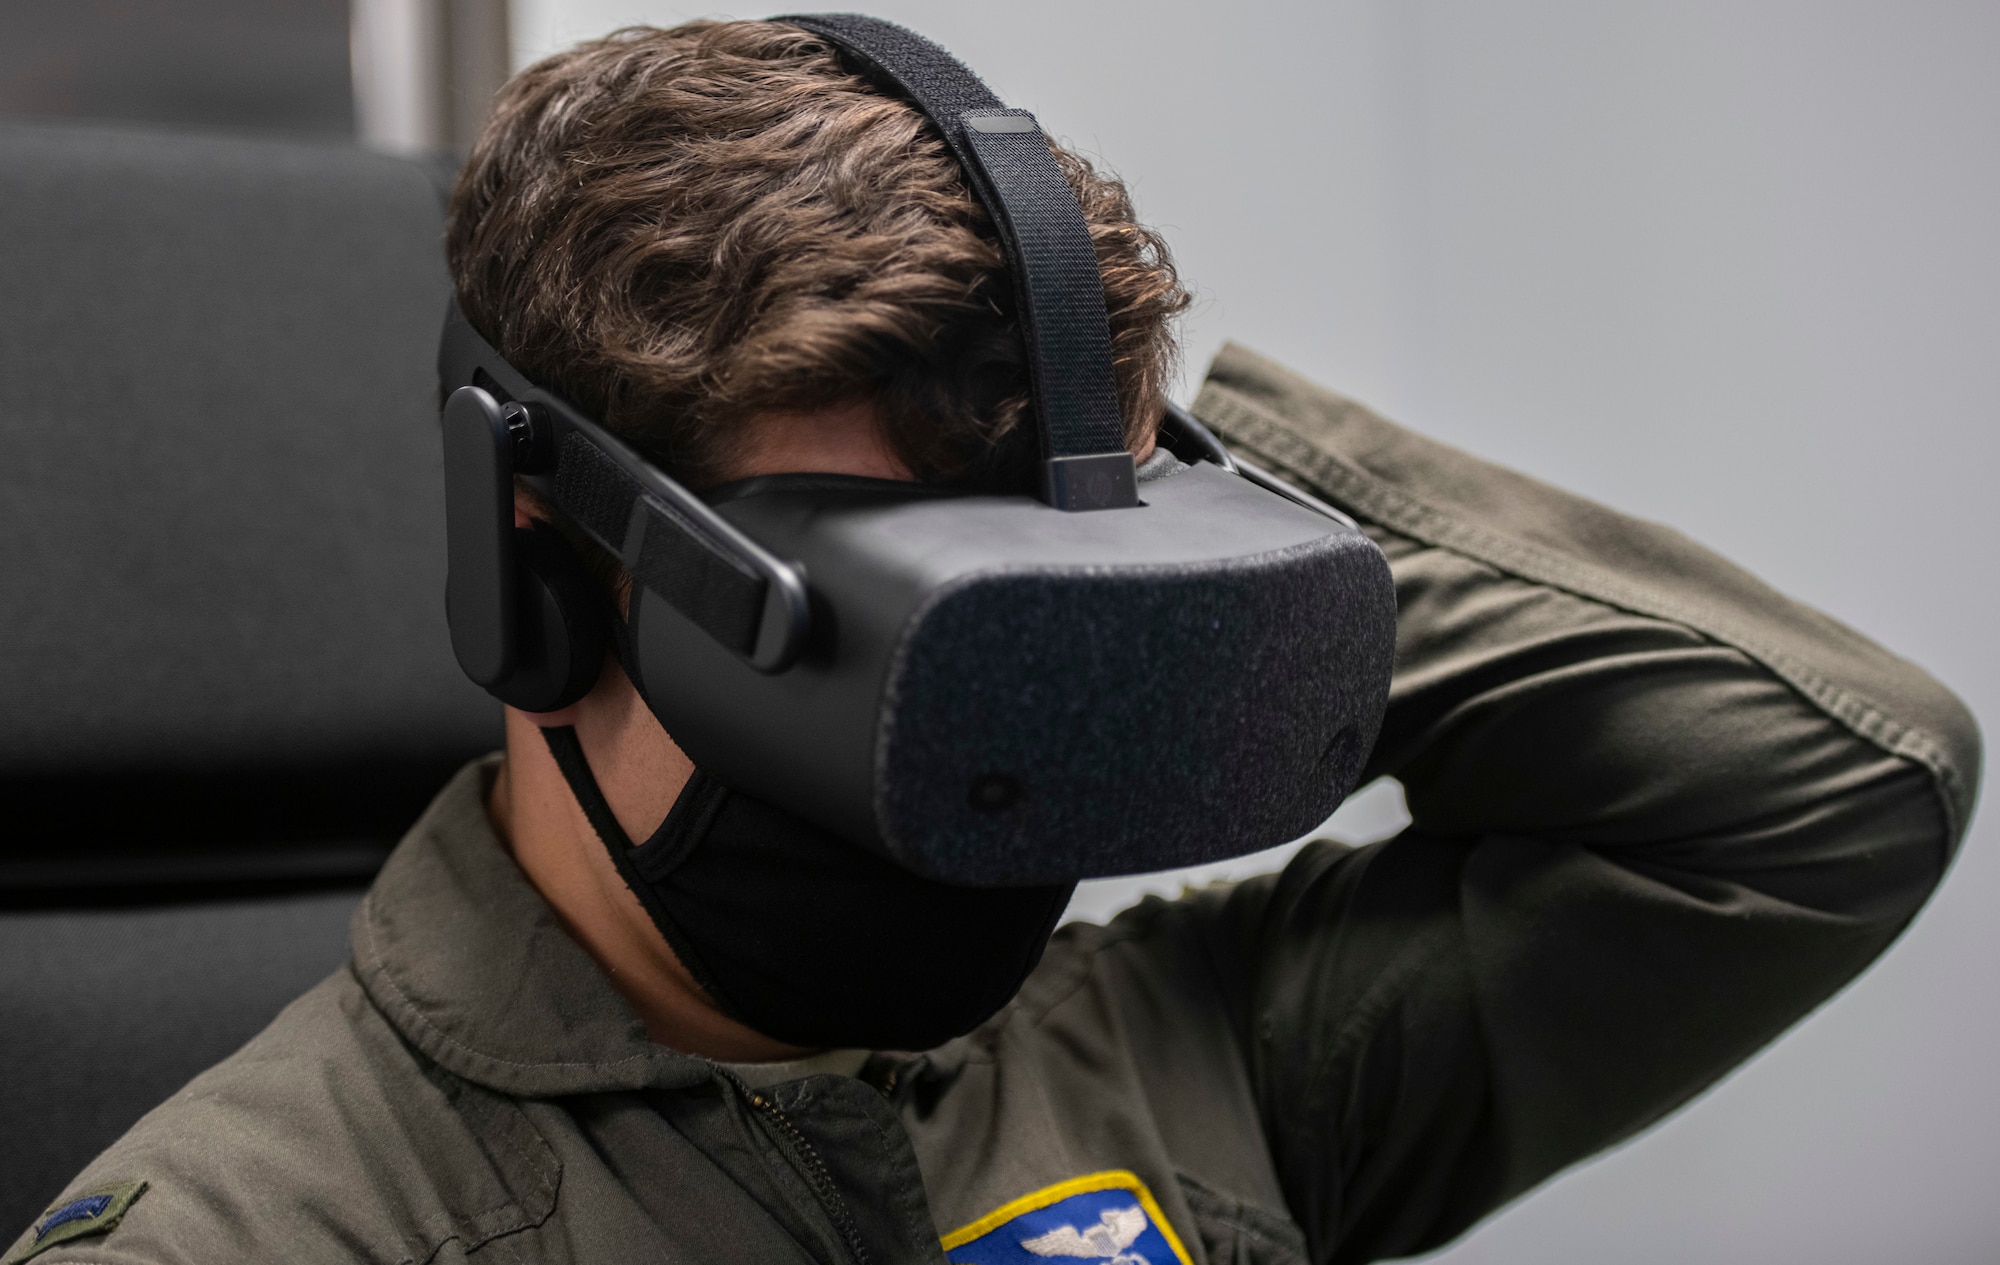 U. S. Air Force Lt. Jeremiah Knipe, T-6 instructor pilot assigned to the 85th Flying Training Squadron, dons an immersive training device headset during evaluations at Joint Base San Antonio-Randolph, Feb. 2, 2021.